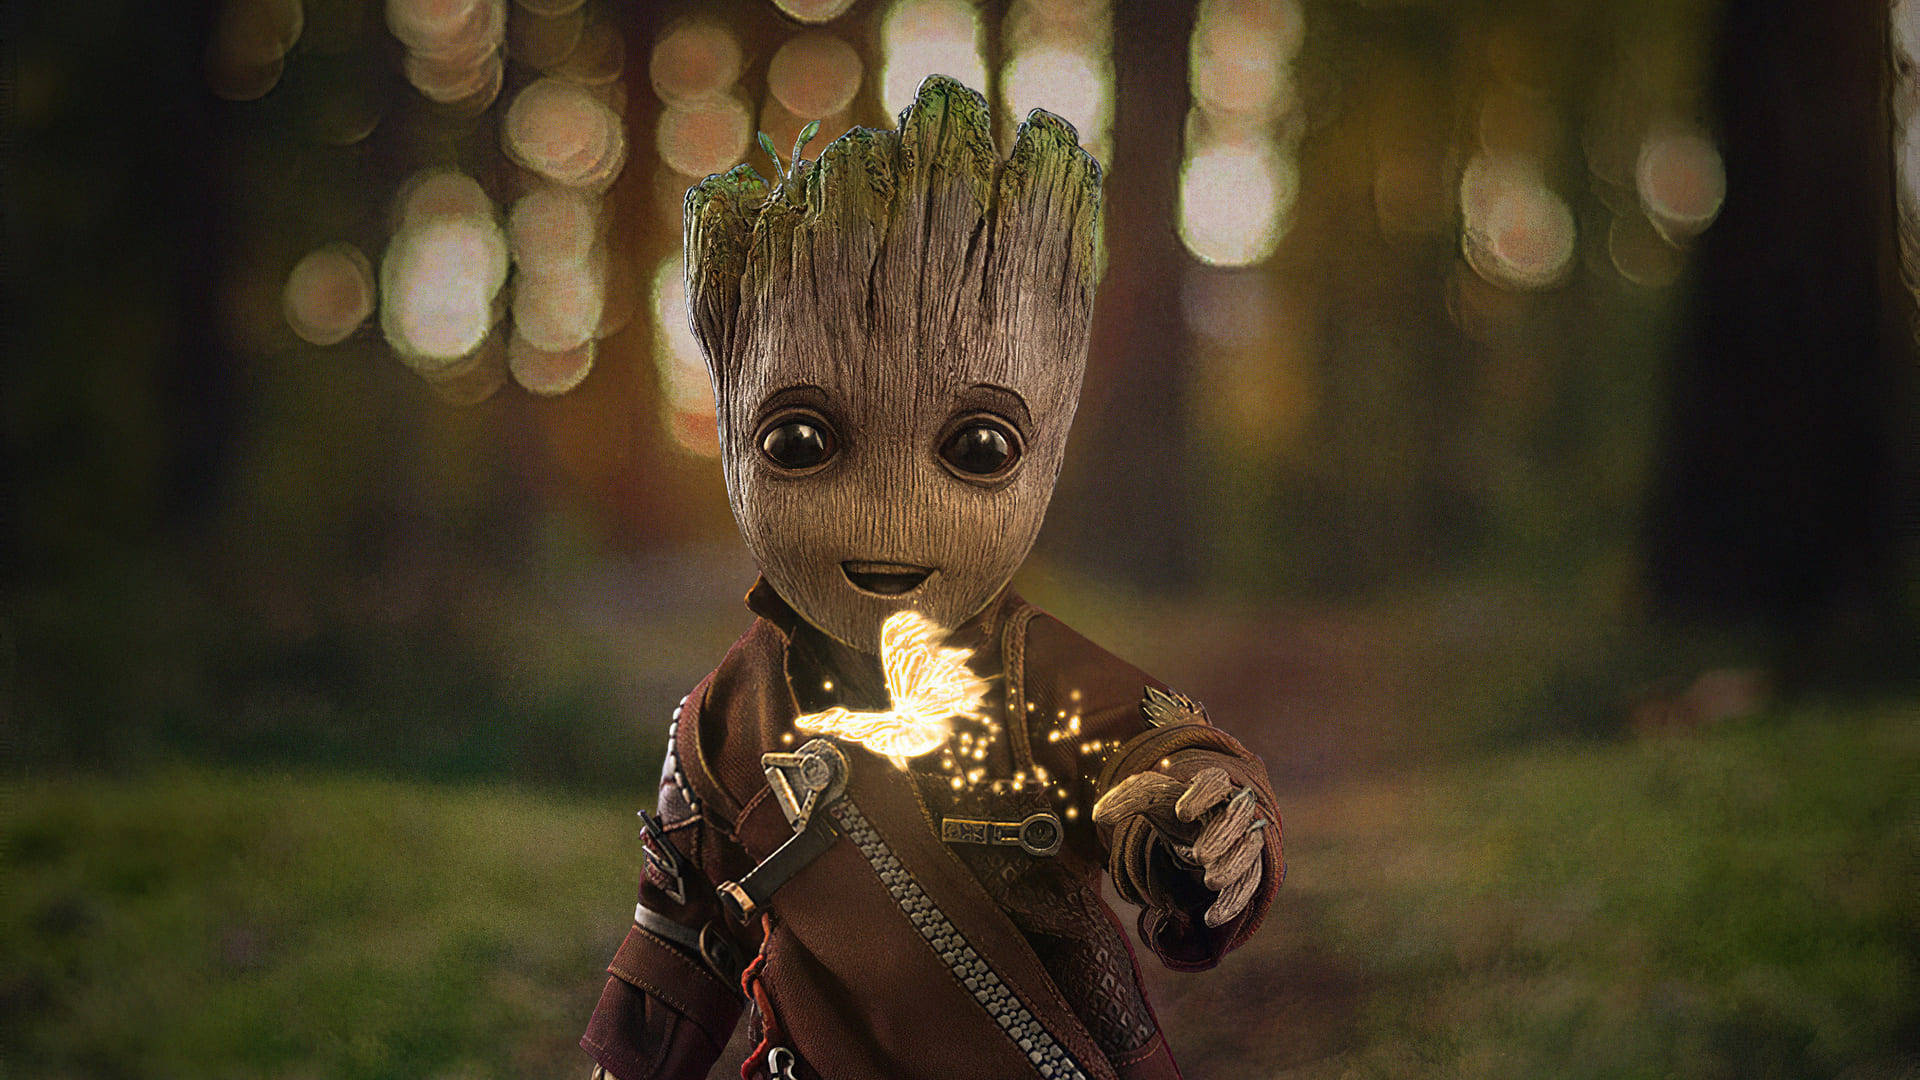 Cool Picture Of Baby Groot Wallpaper